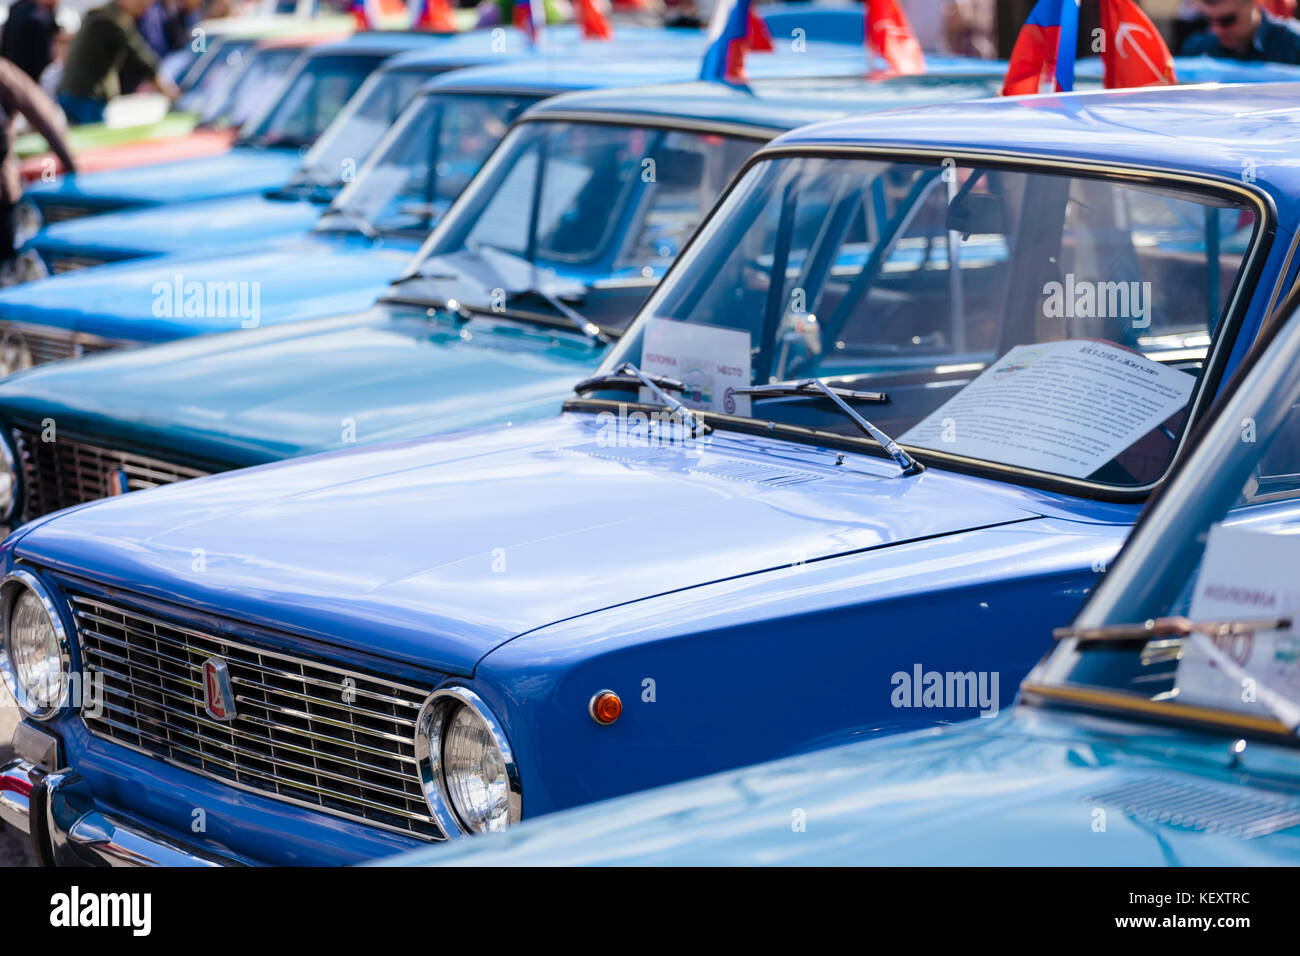 Photograph with row of blue vintage cars at exhibition, Saint Petersburg, Russia Stock Photo